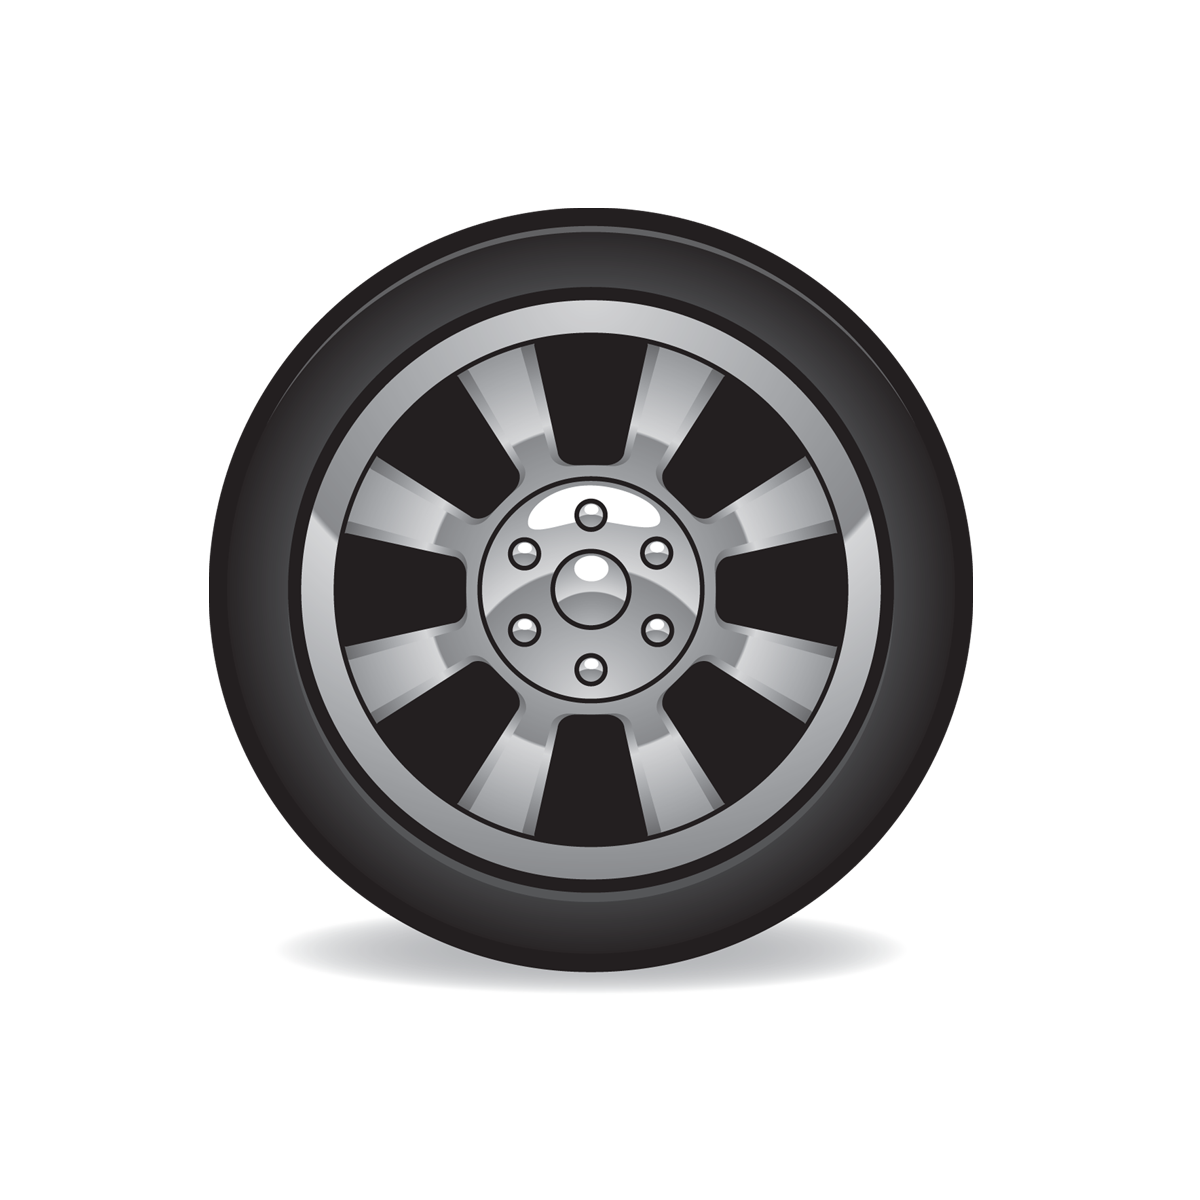 Tire Icon Full Size   Free Images At Clker Com   Vector Clip Art